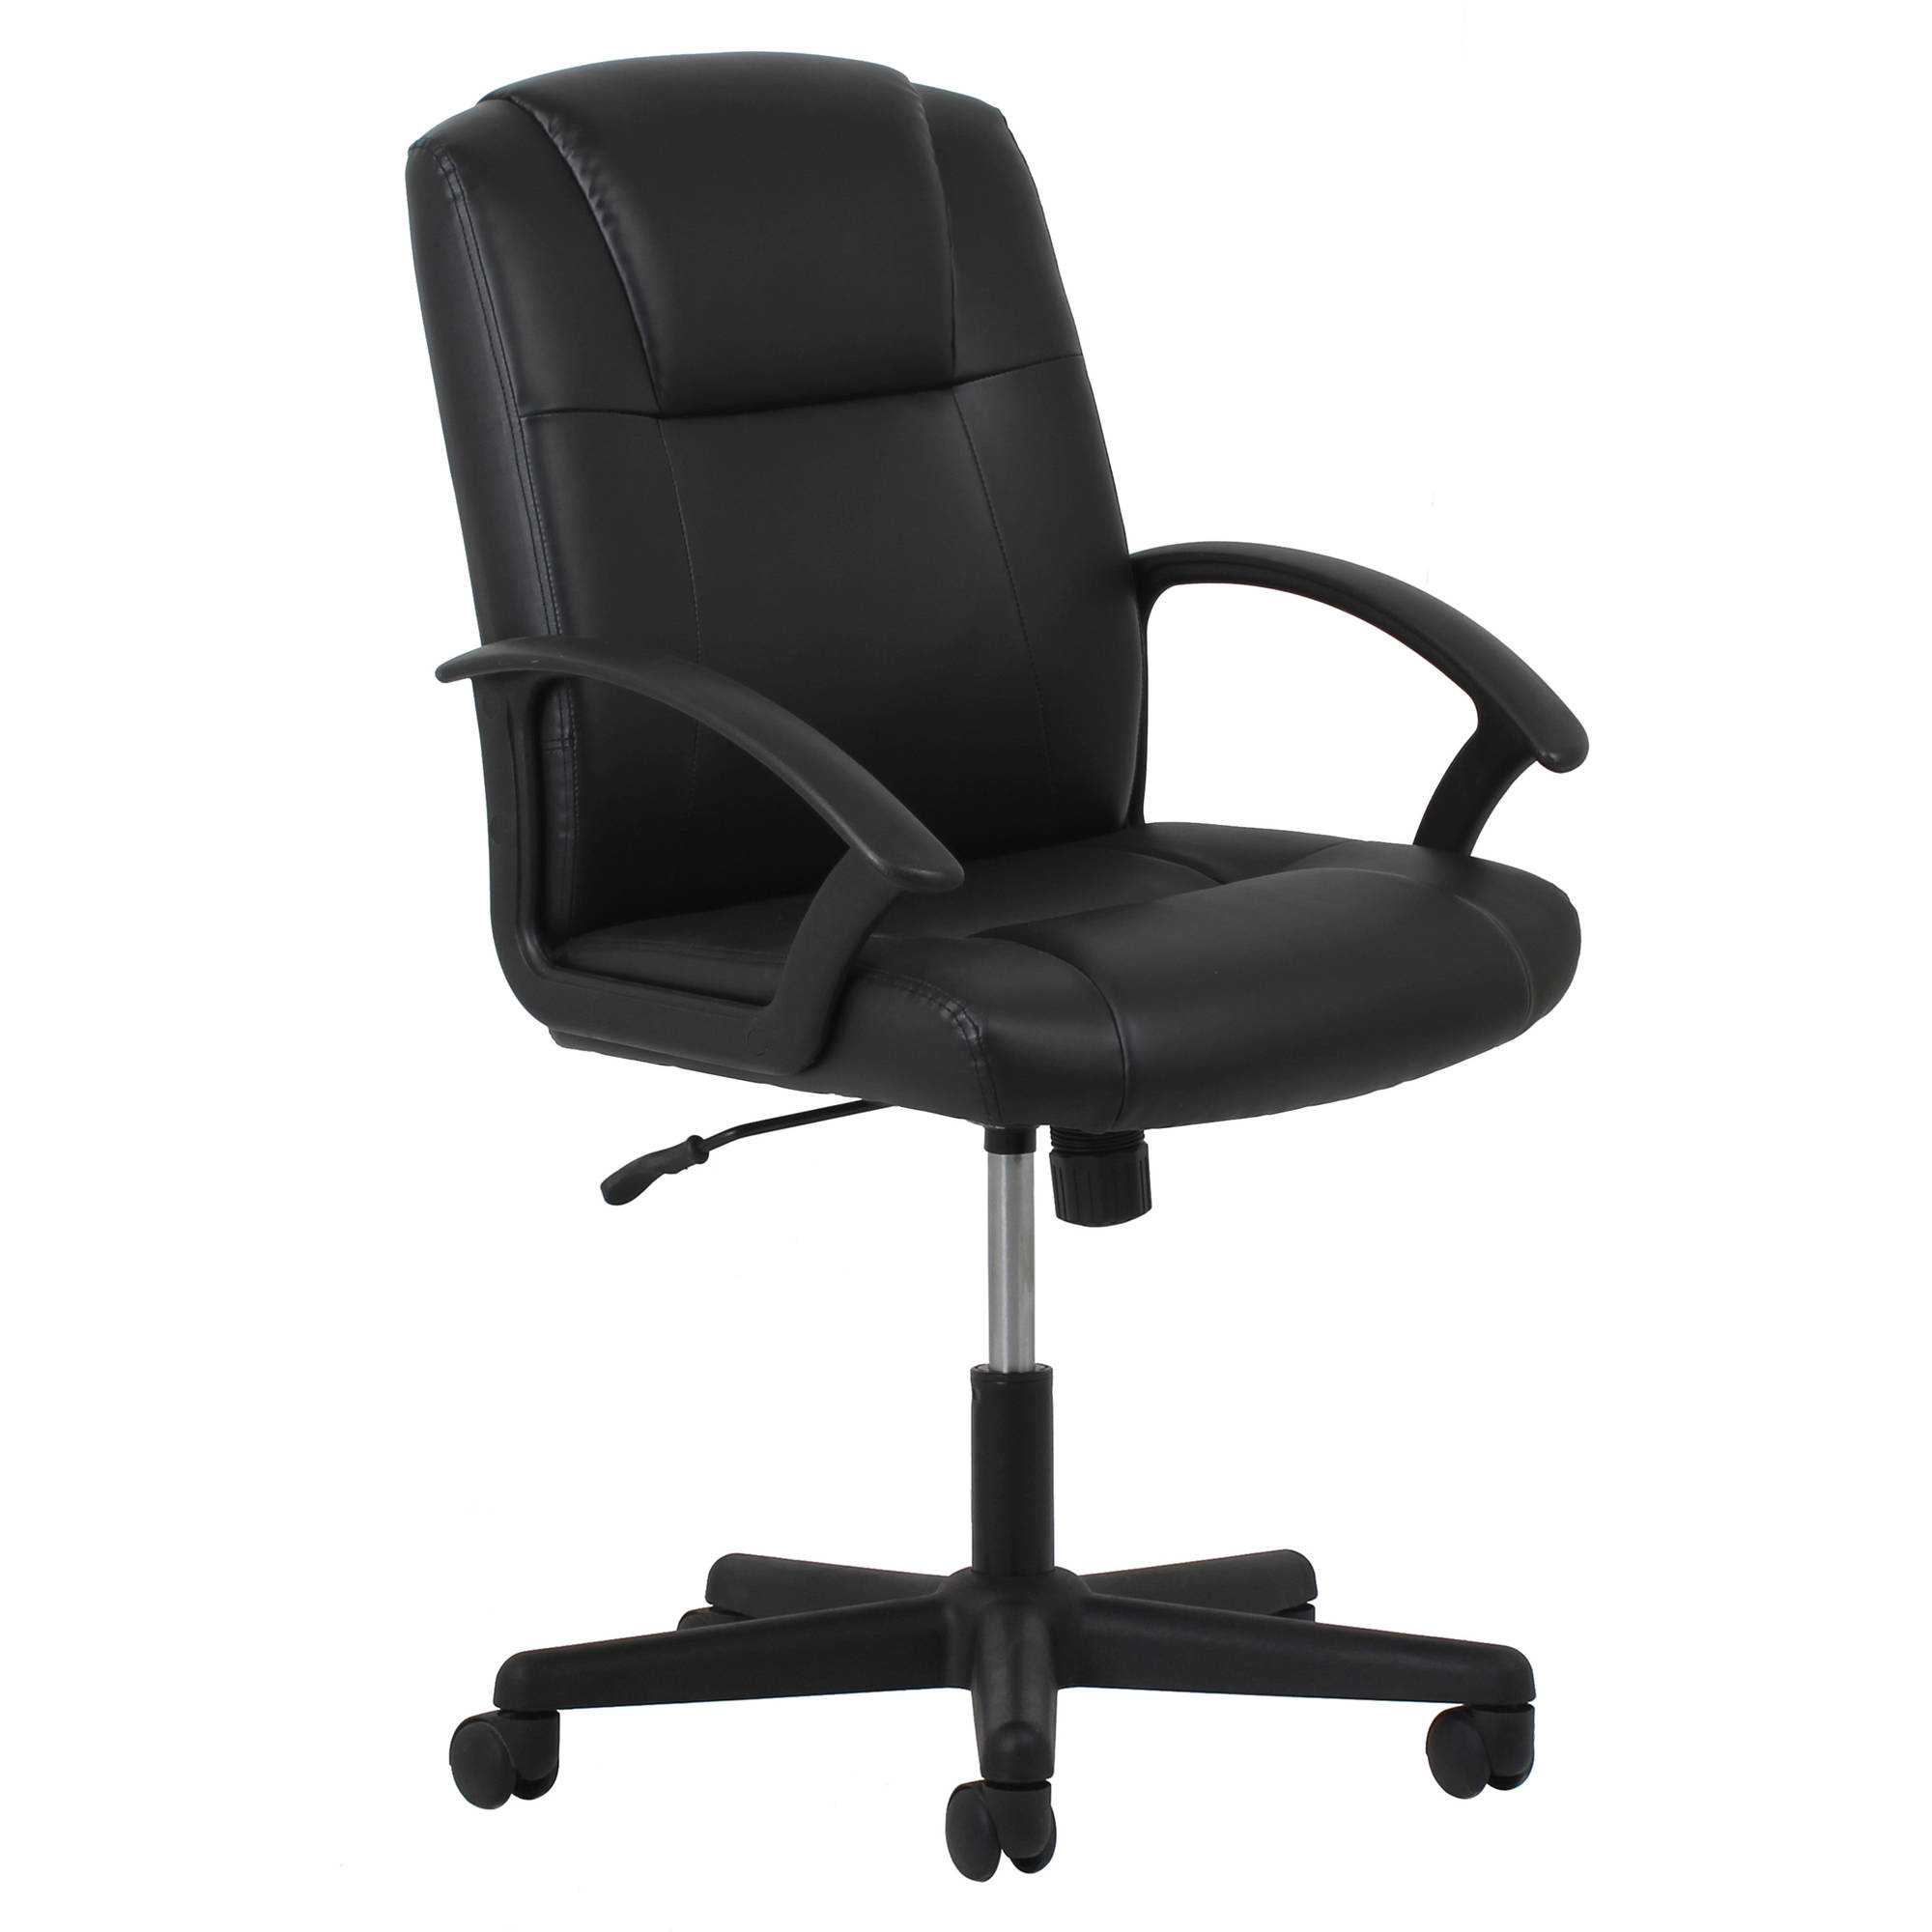 Essentials by OFM Ergonomic Leather Executive Office Chair with Arms, Black $35.19 @Walmart